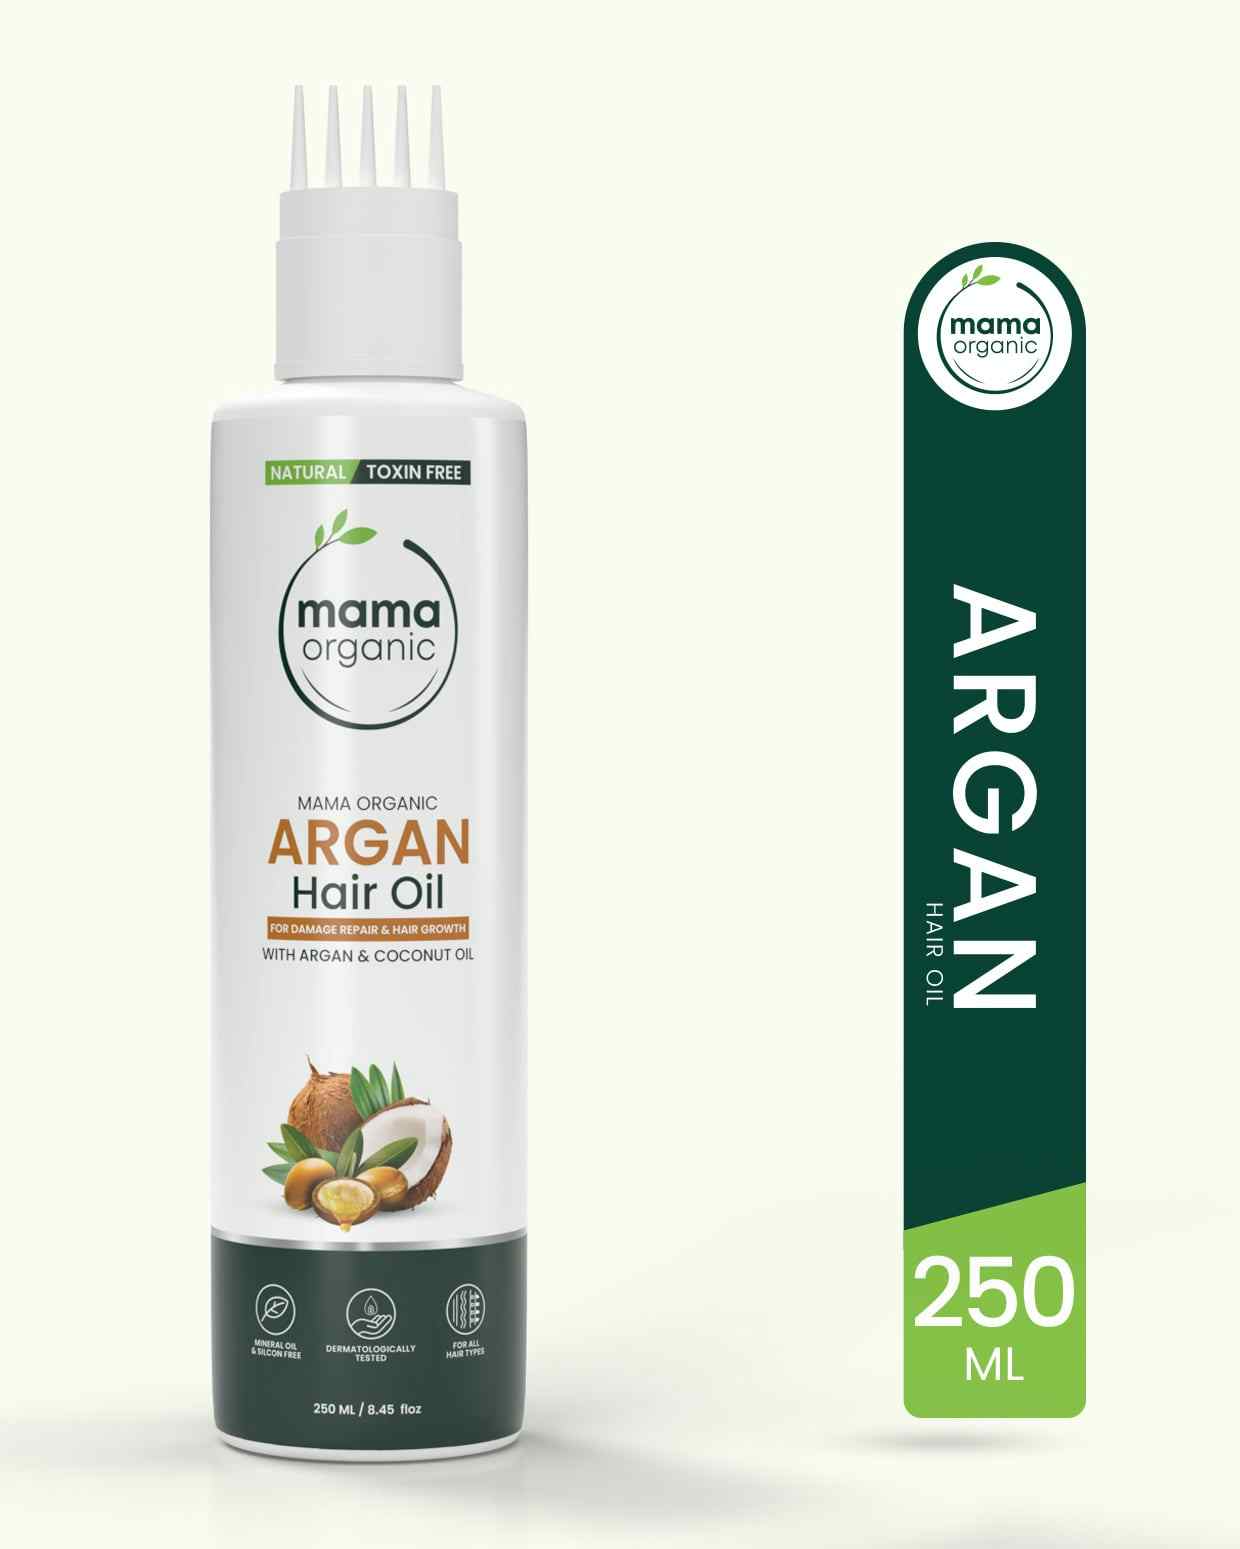 Mama Organic Argan Hair Oil For Frizzy Hair & Strong Hair | For Women & Girls | Natural & Toxin-Free - 250ml